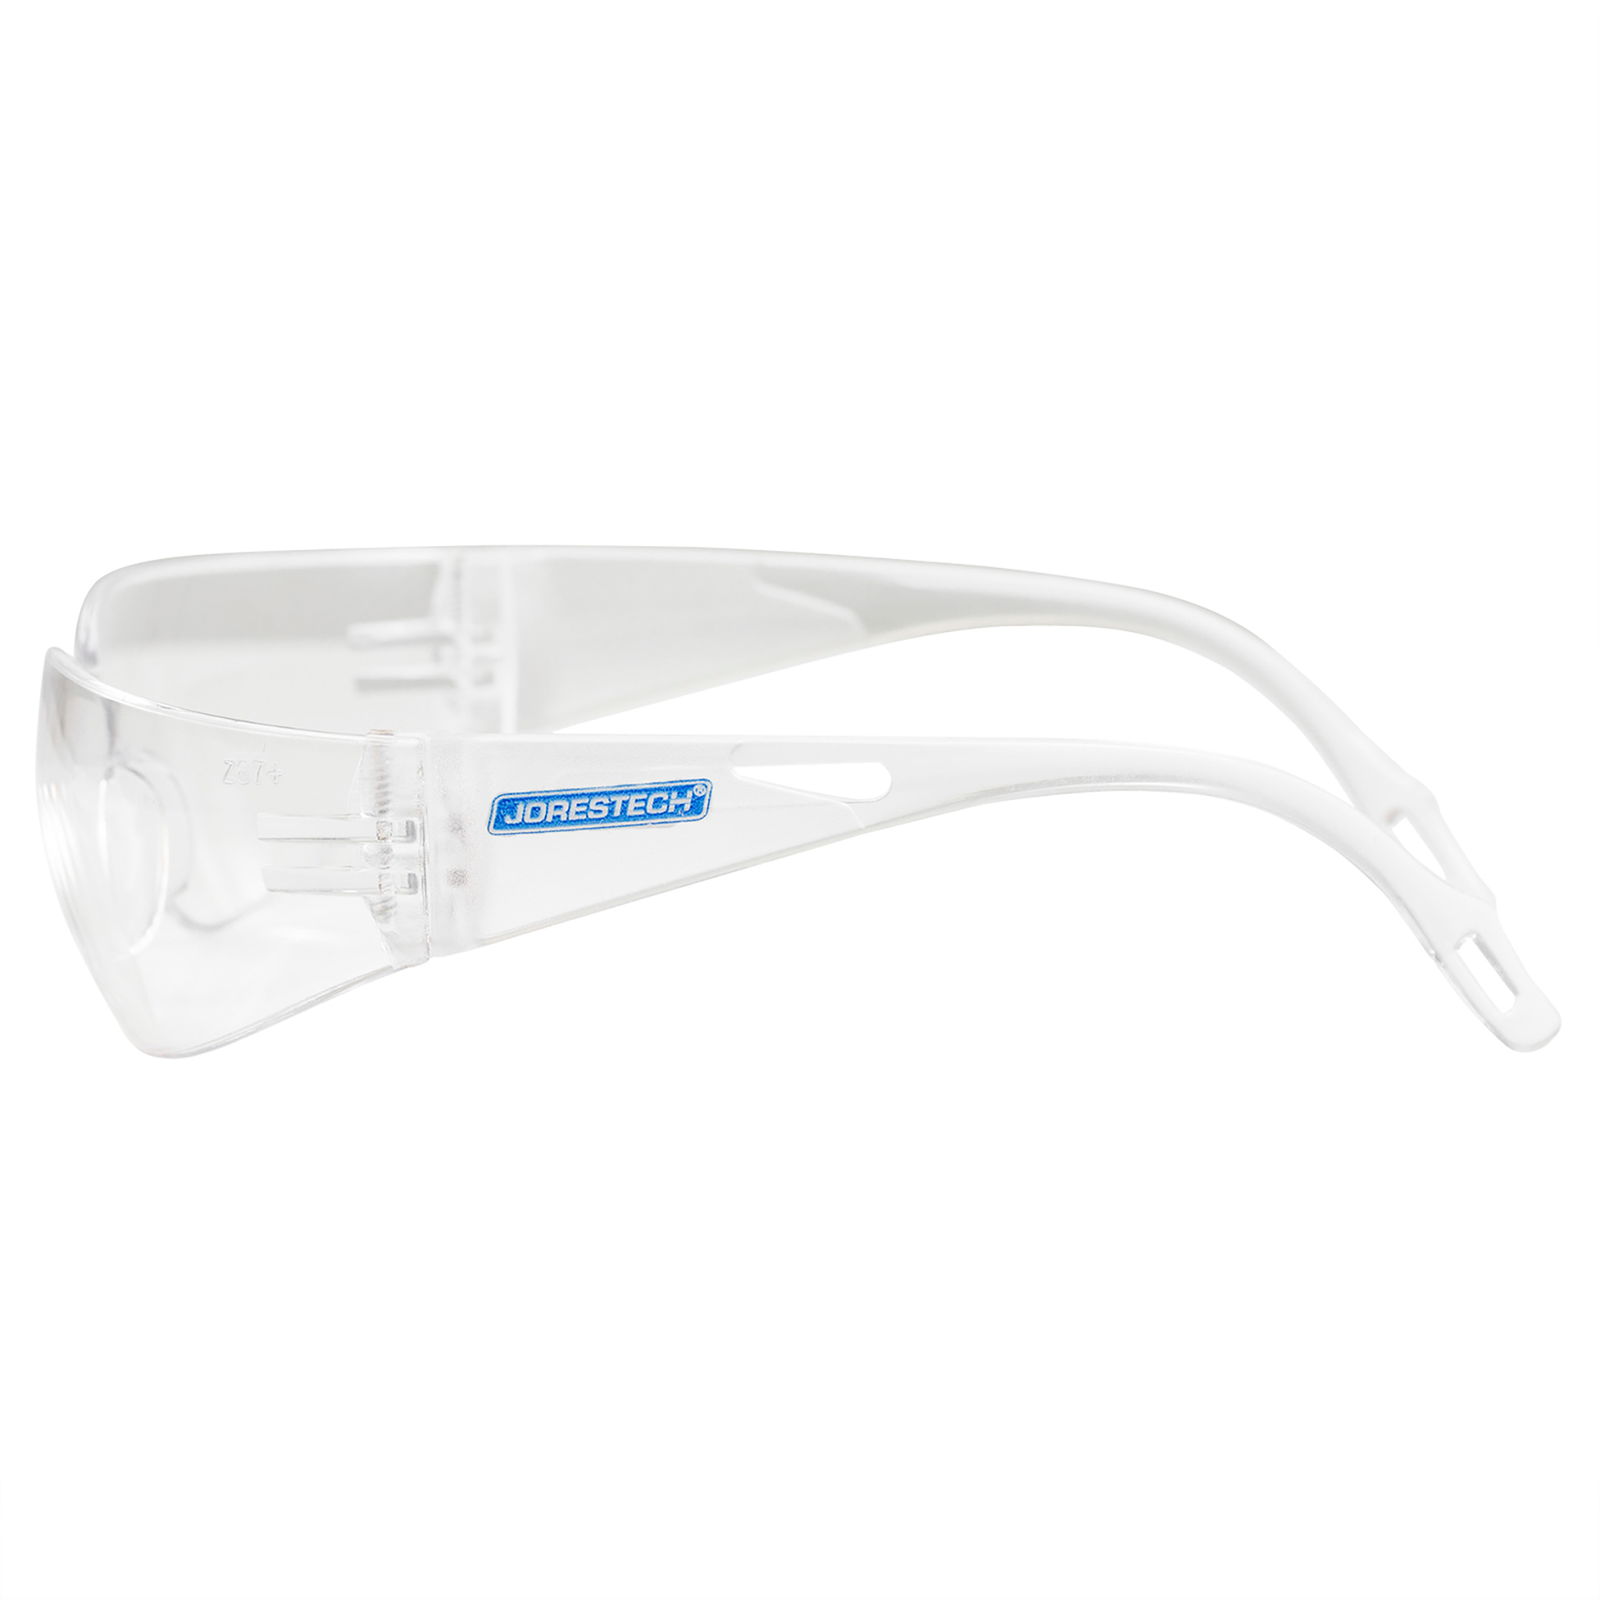 Clear safety glasses for high impact protection for kids